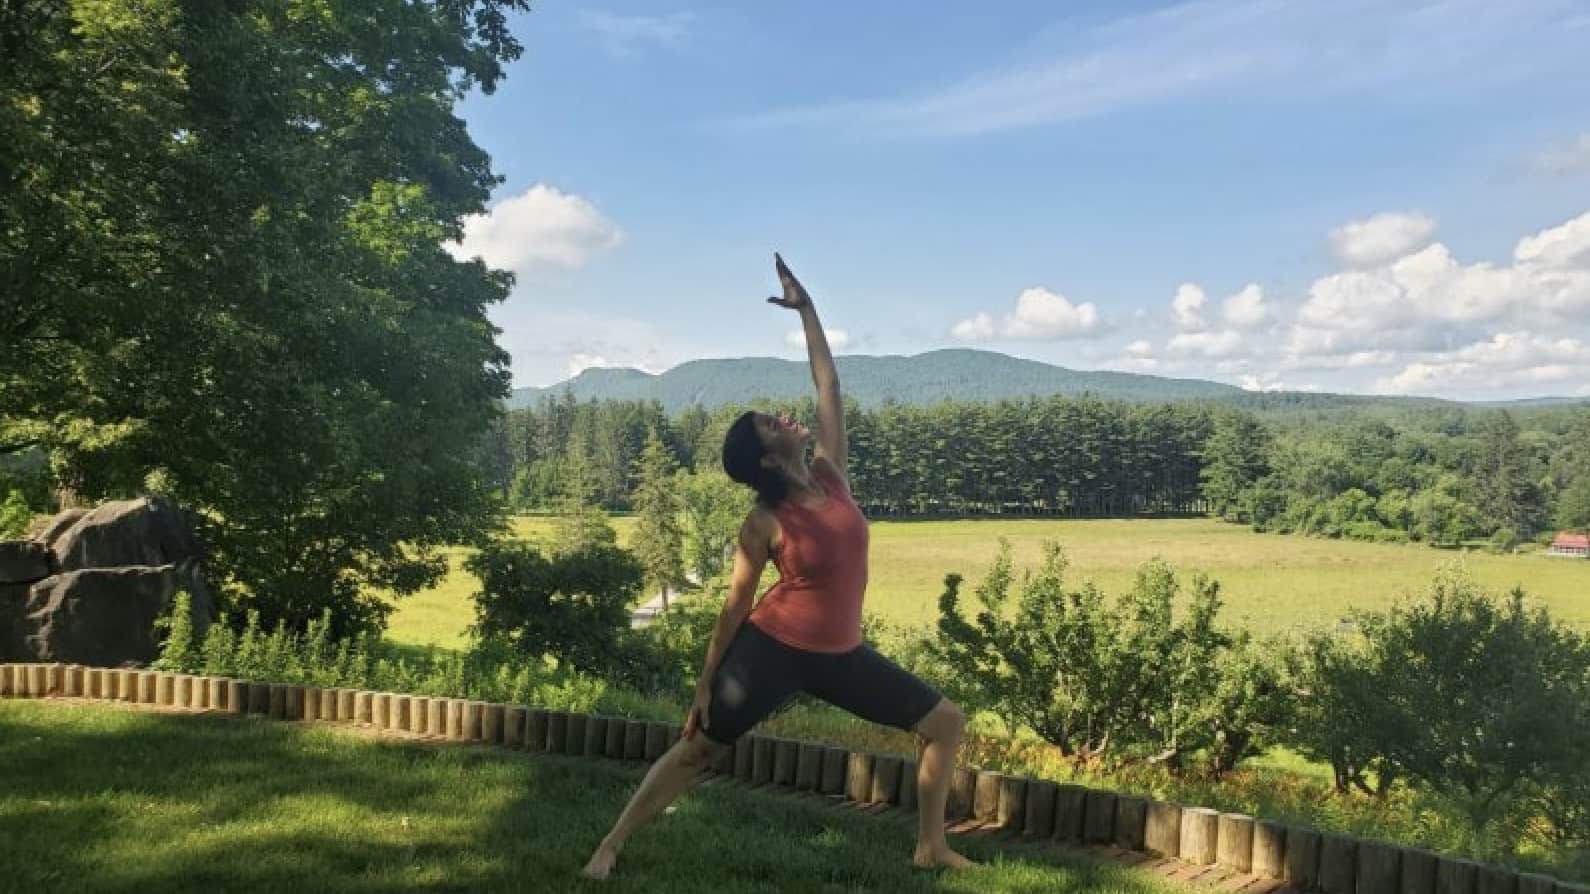 Naumkeag will offer a yoga workshop in the gardens. Press photo courtesy of Naumkeag